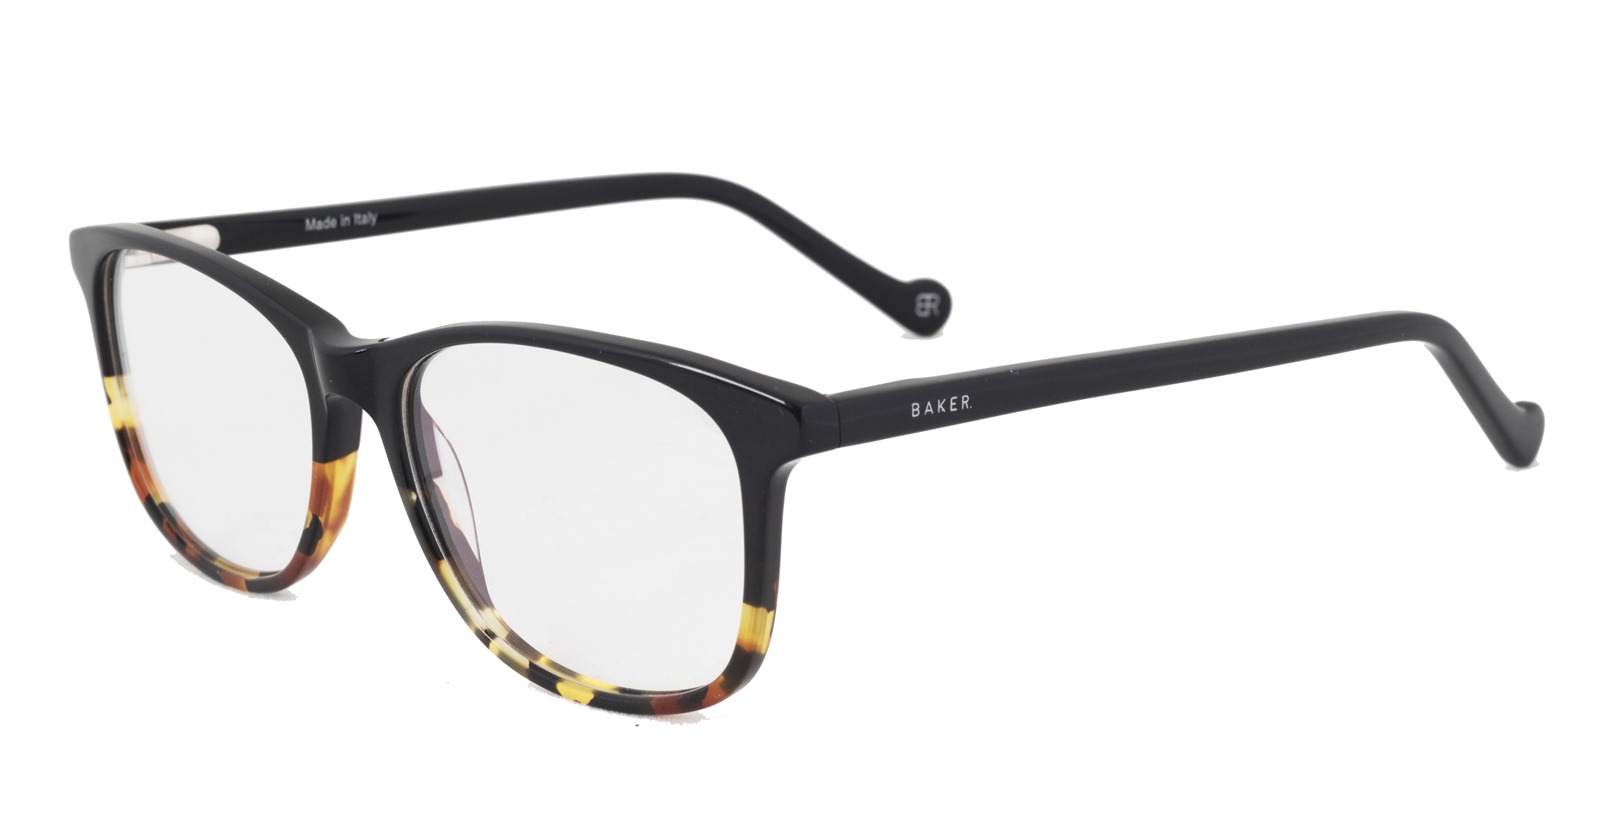 baker spectacle frames tortoise shell execuspecs south africa